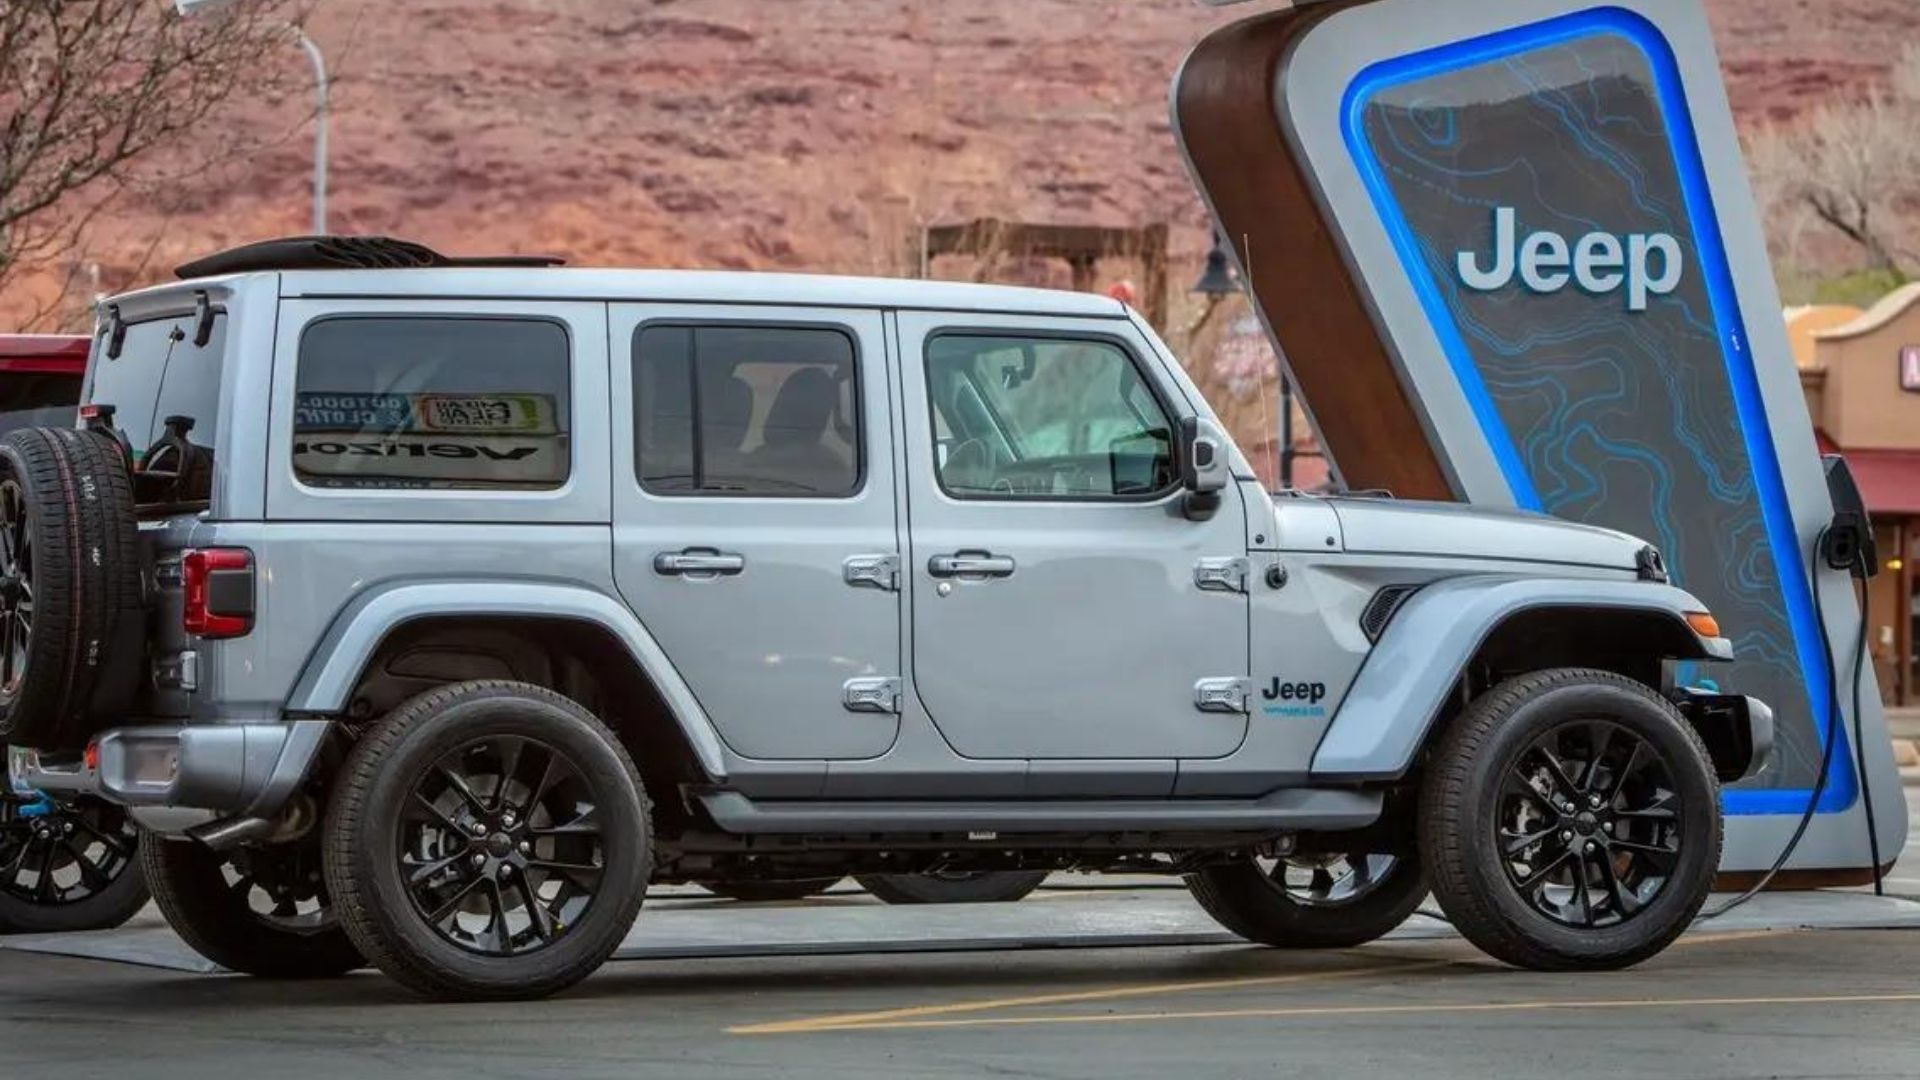 https://e-vehicleinfo.com/everything-you-need-to-know-about-charging-the-jeep/